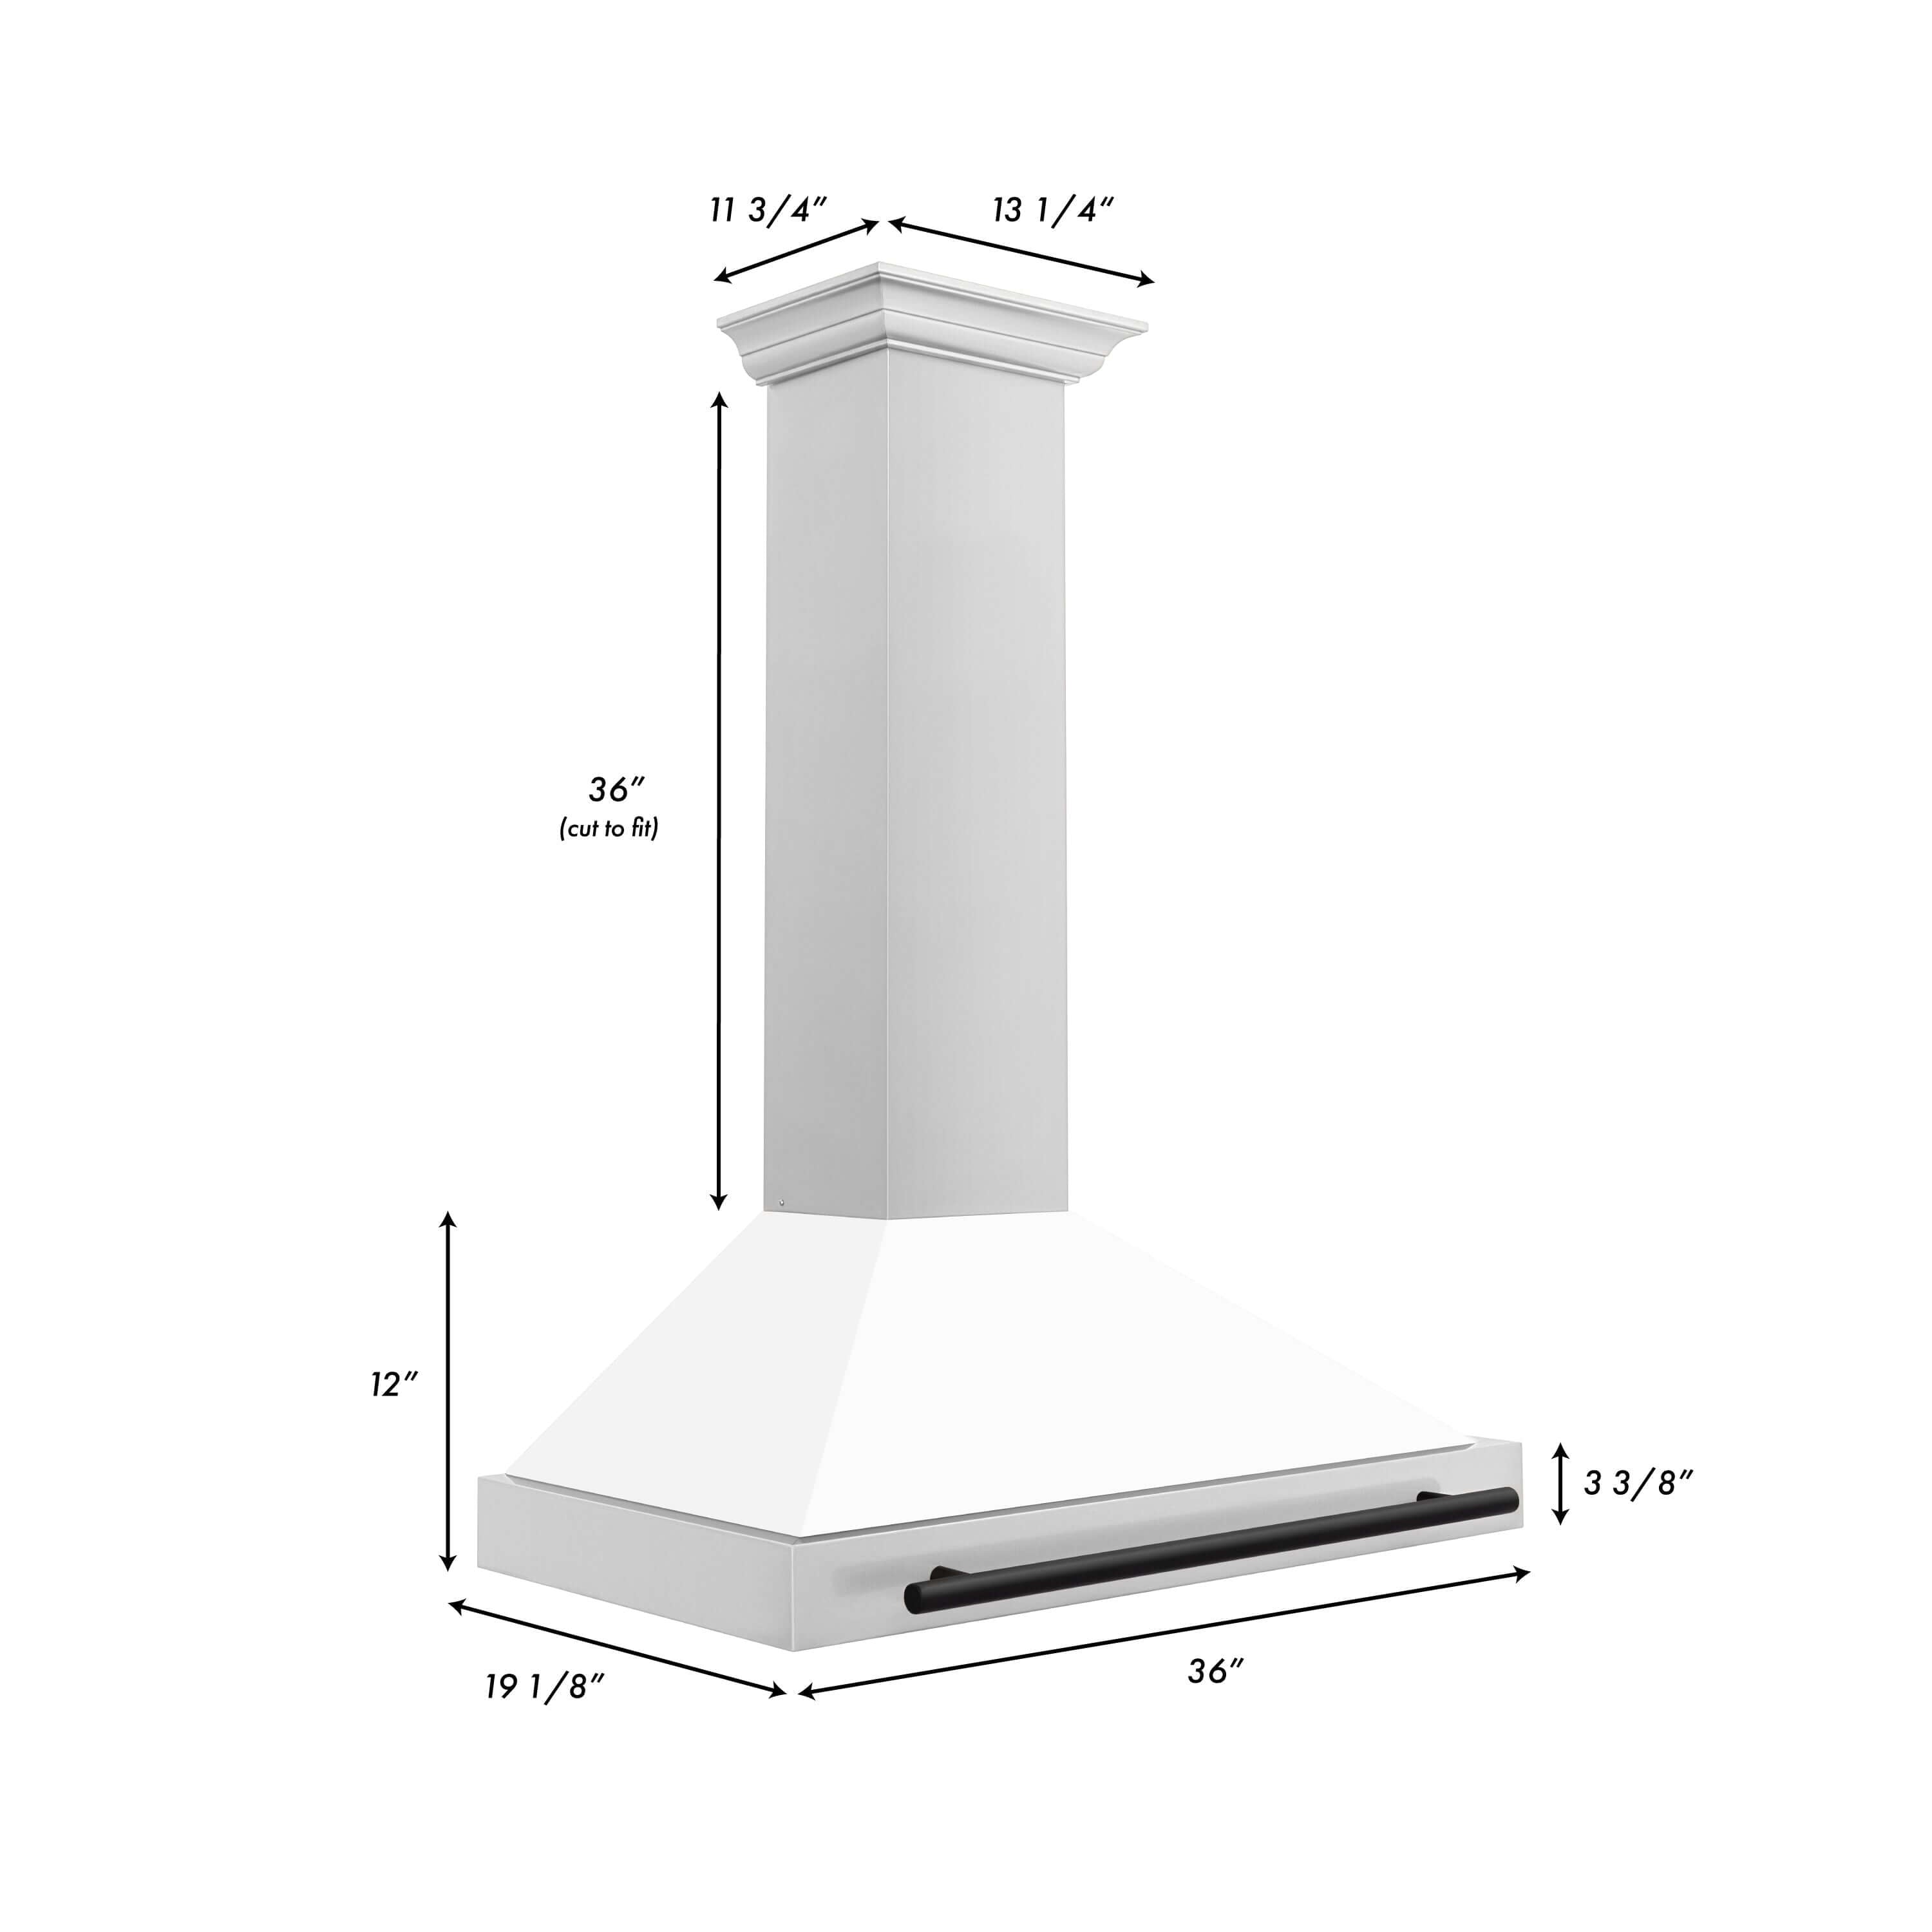 ZLINE Autograph Edition 36 in. Stainless Steel Range Hood with White Matte Shell and Accents (KB4STZ-WM36) dimensional diagram and measurements.